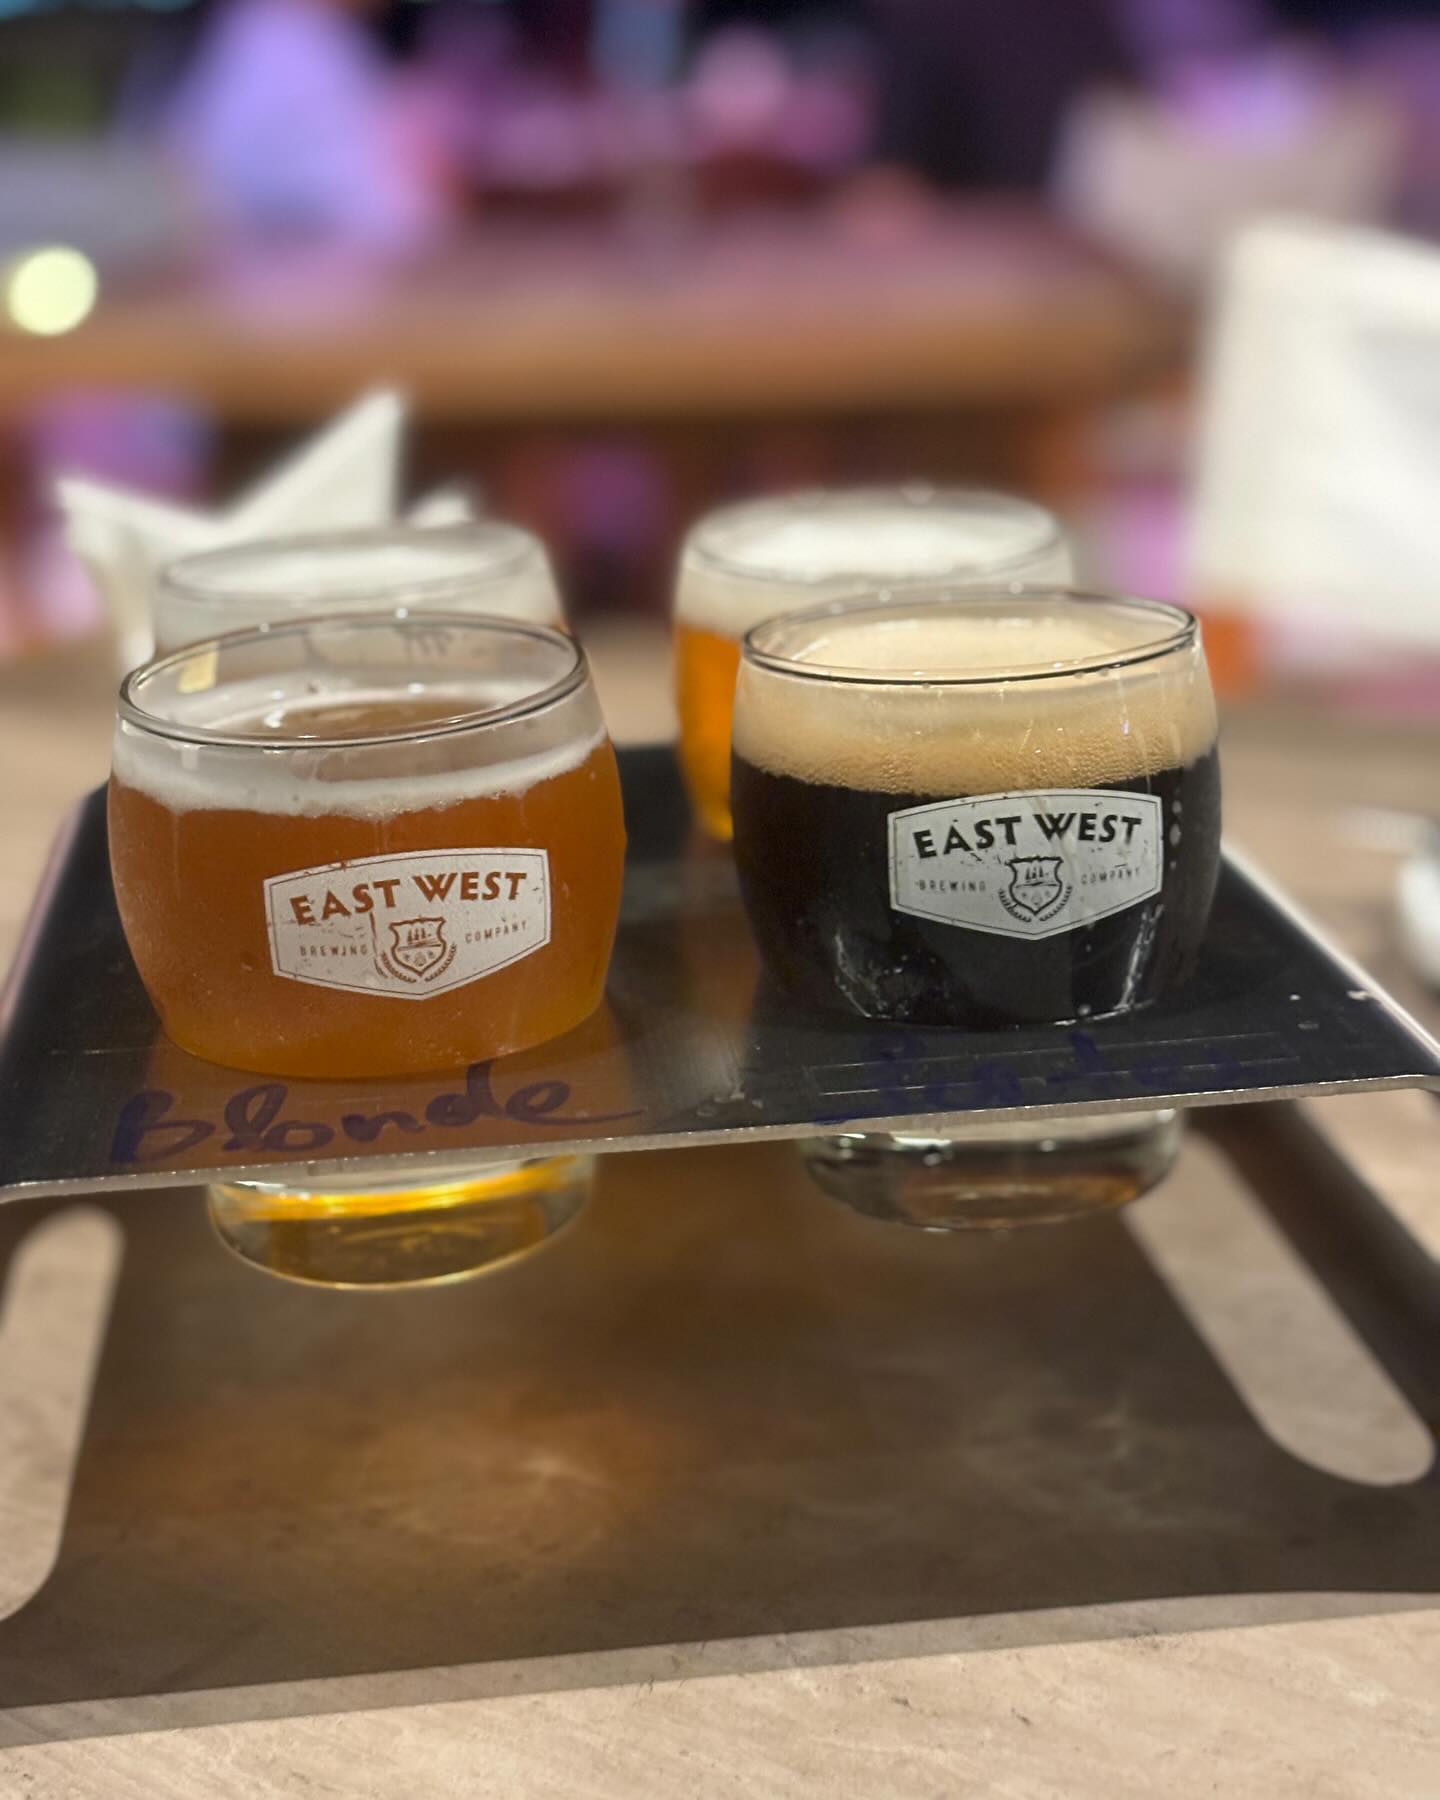 East West Brewing in Da Nang Vietnam 🇻🇳 
Finally some good craft beer 🍻 
IPA, Pale Ale, Coffee Porter, Belgium Blonde 

Bill came $27.  Many farang here in Da Nang.  The weather is great 81 degrees.